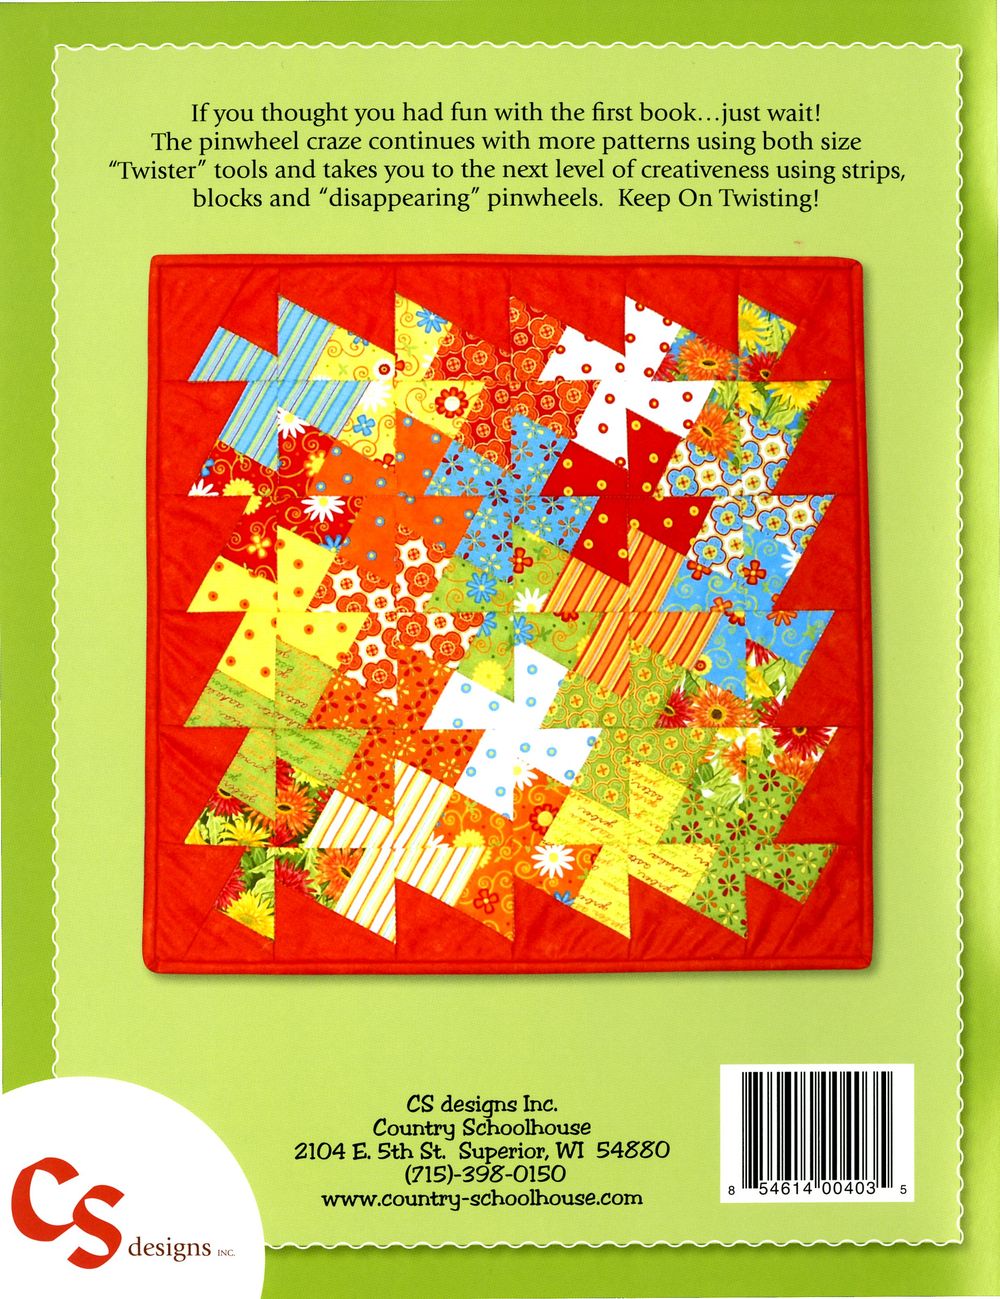 Let's Twist Again Quilt Pattern Book by Marsha Bergren for Twister Sisters